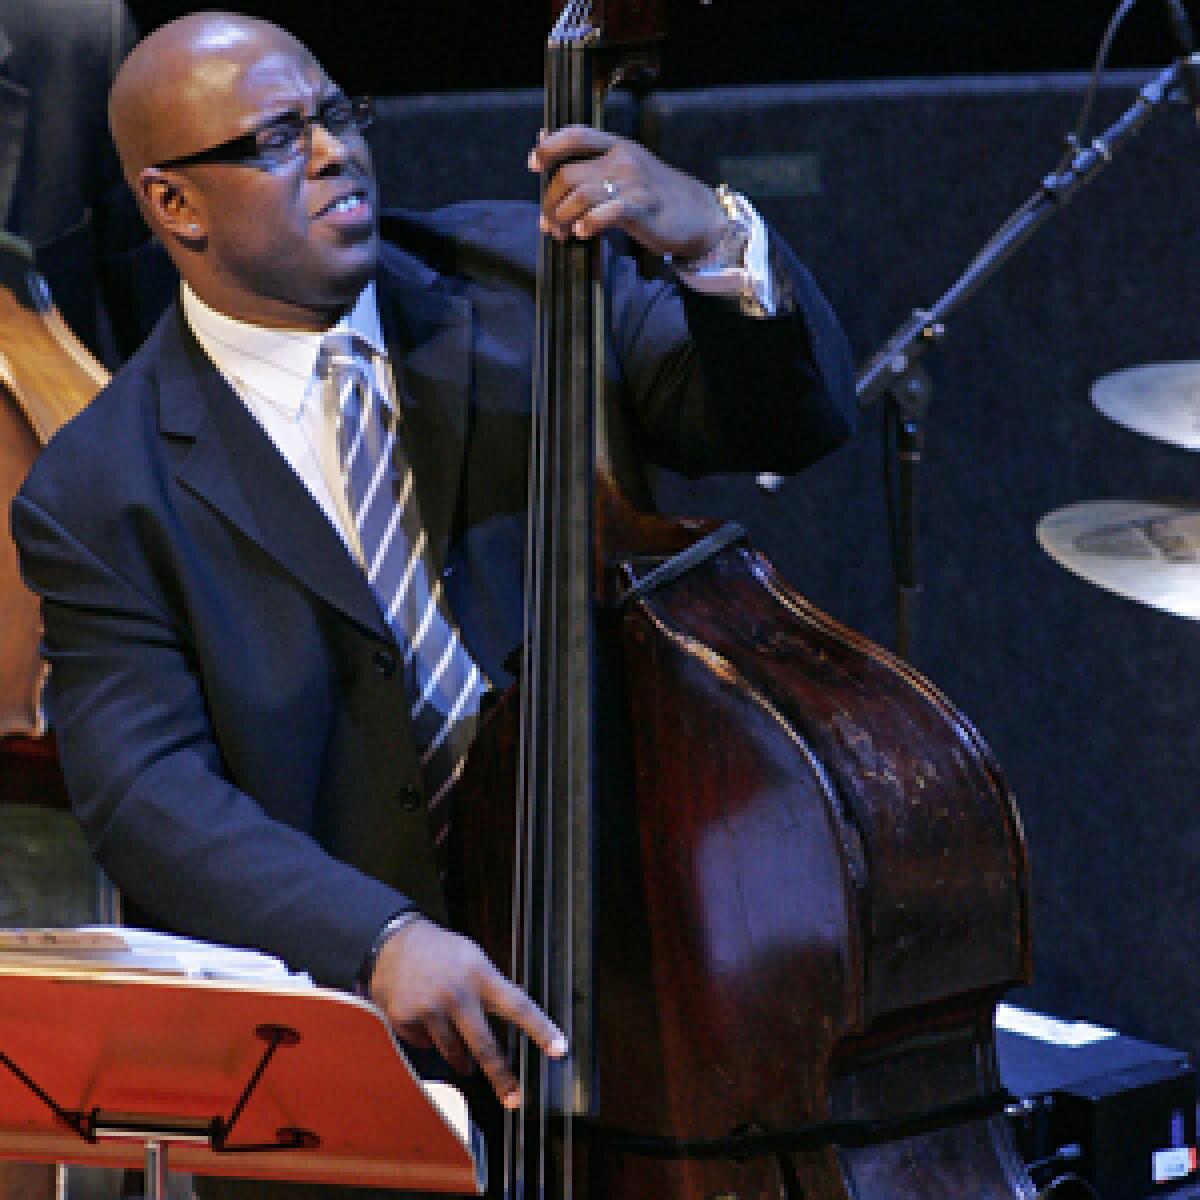 Bassist and composer Christian McBride performs in a musical tribute at the Disney Hall.